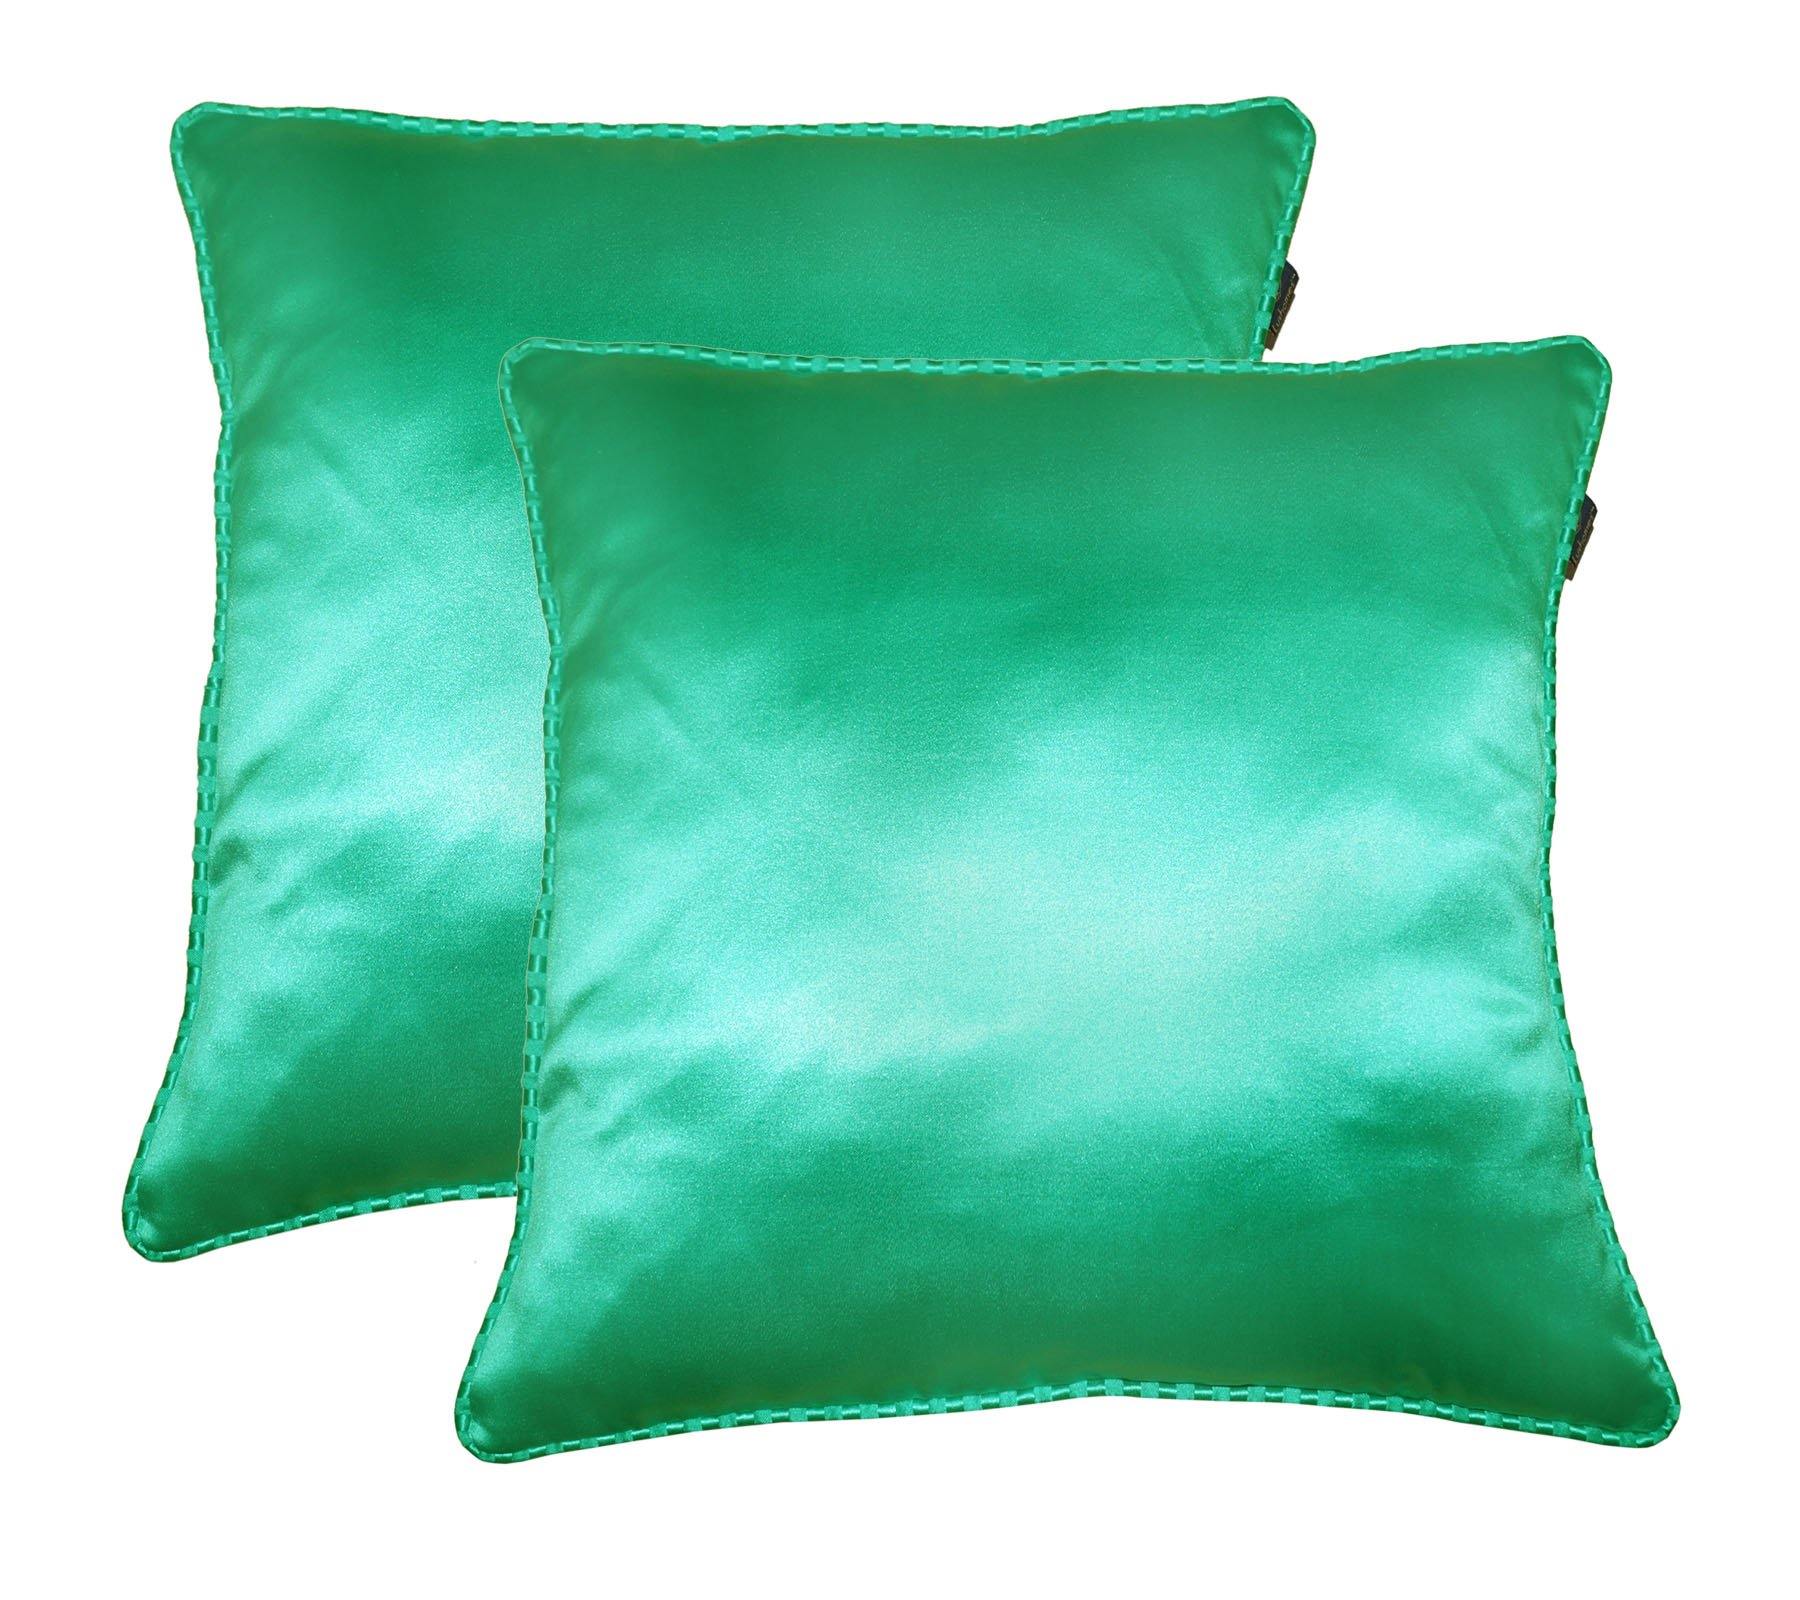 Lushomes sea green contemporary plain cushion cover with striped piping, 12 x 12‰۝(Pack of 2) Torantina Collection - Lushomes